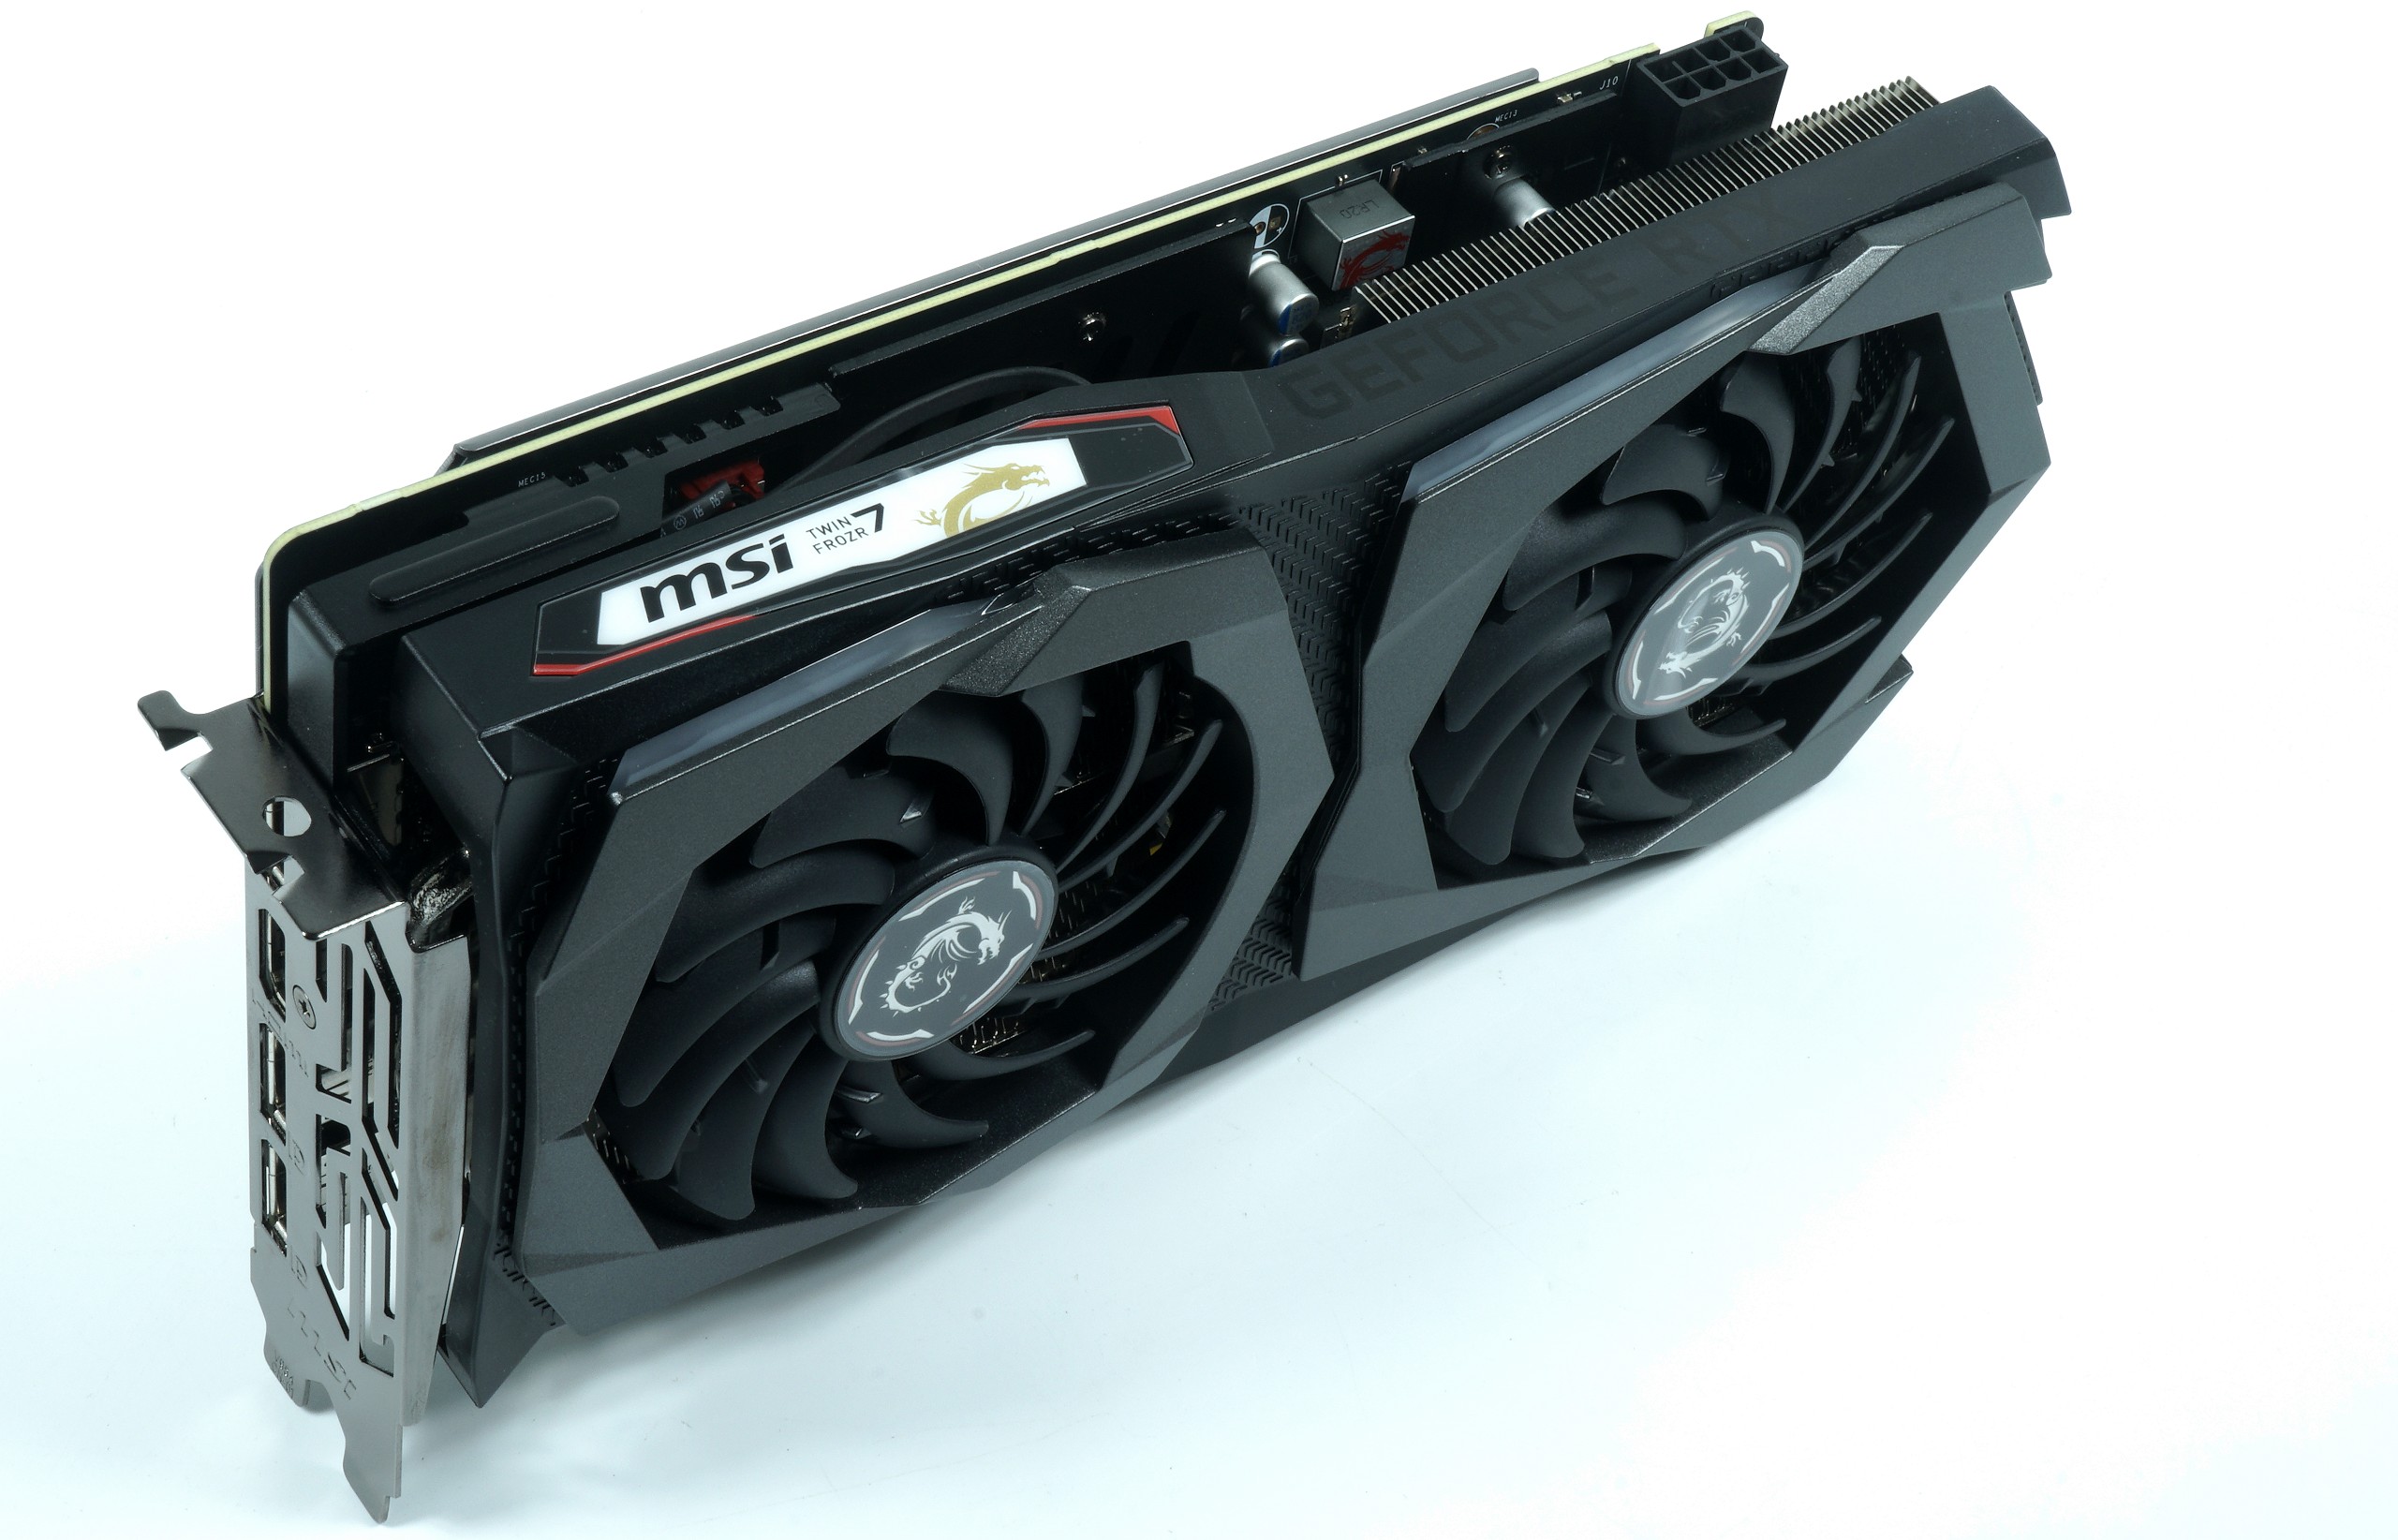 Prevented cannibal: MSI RTX 2060 Super Gaming X in review - quiet